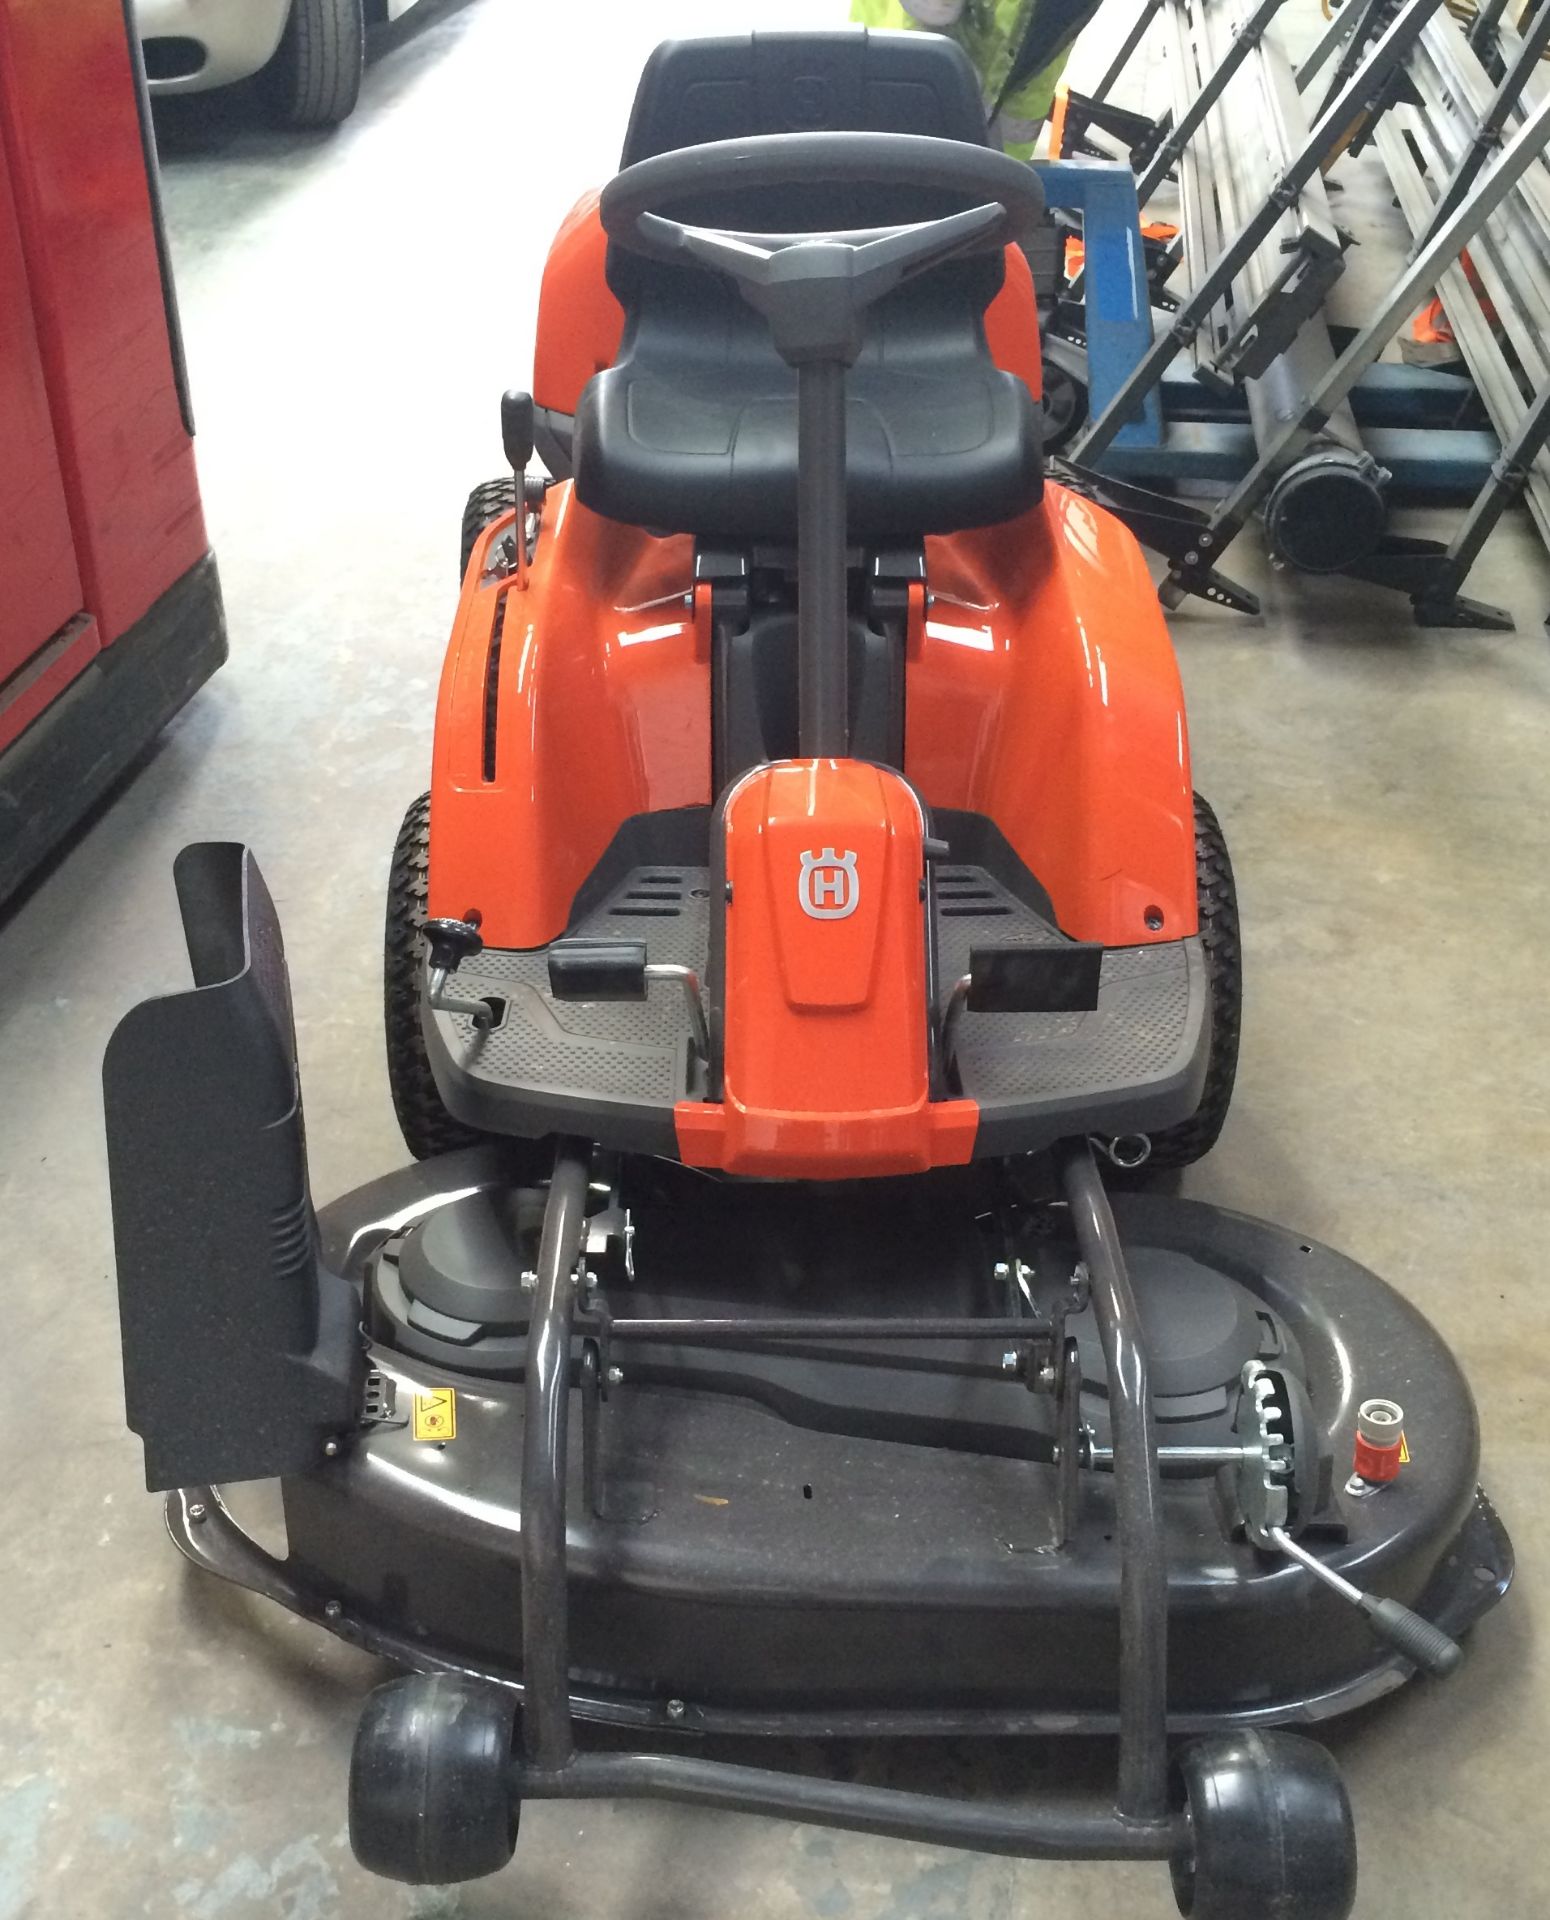 Husqvarna 42” Articulated Side Discharge Mower, Hydrostatic, 500cc 11KW Motor - Image 3 of 4